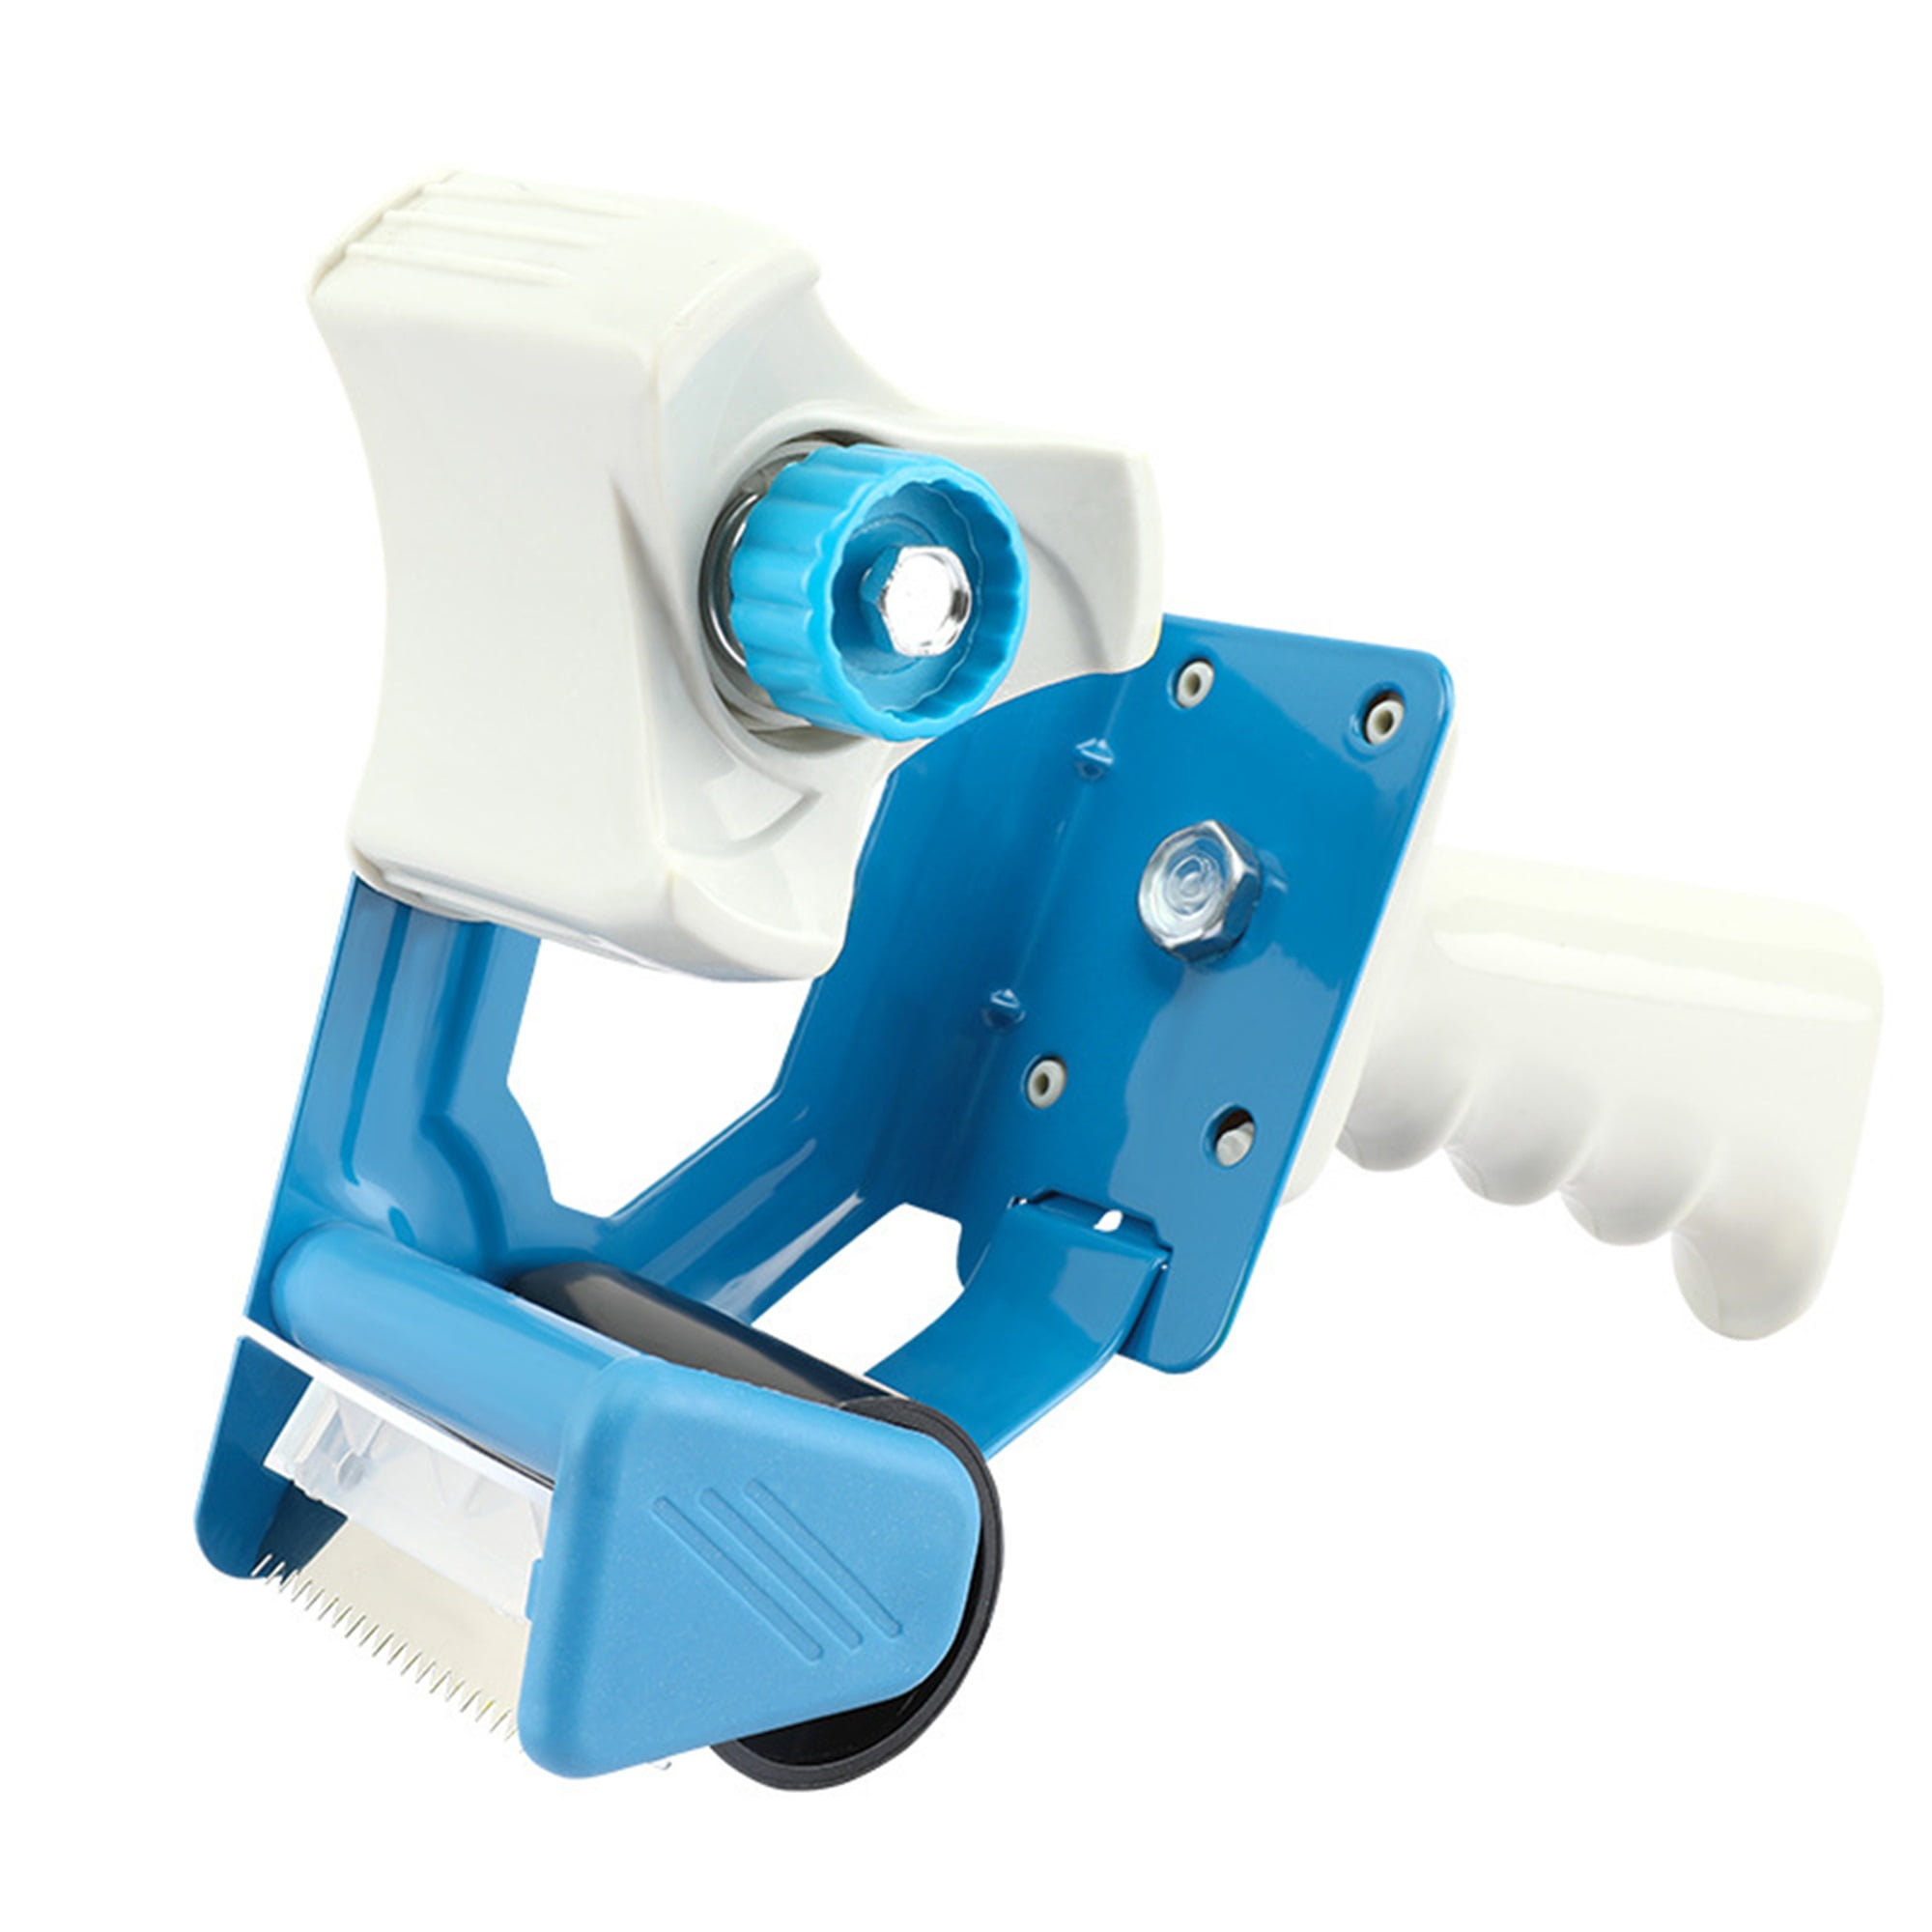 2 Inch Industrial Heavy Duty Easy Side Loading Hand Held Tag-A-Room Tape-Gun Dispenser Blue Packing and Moving Supply 